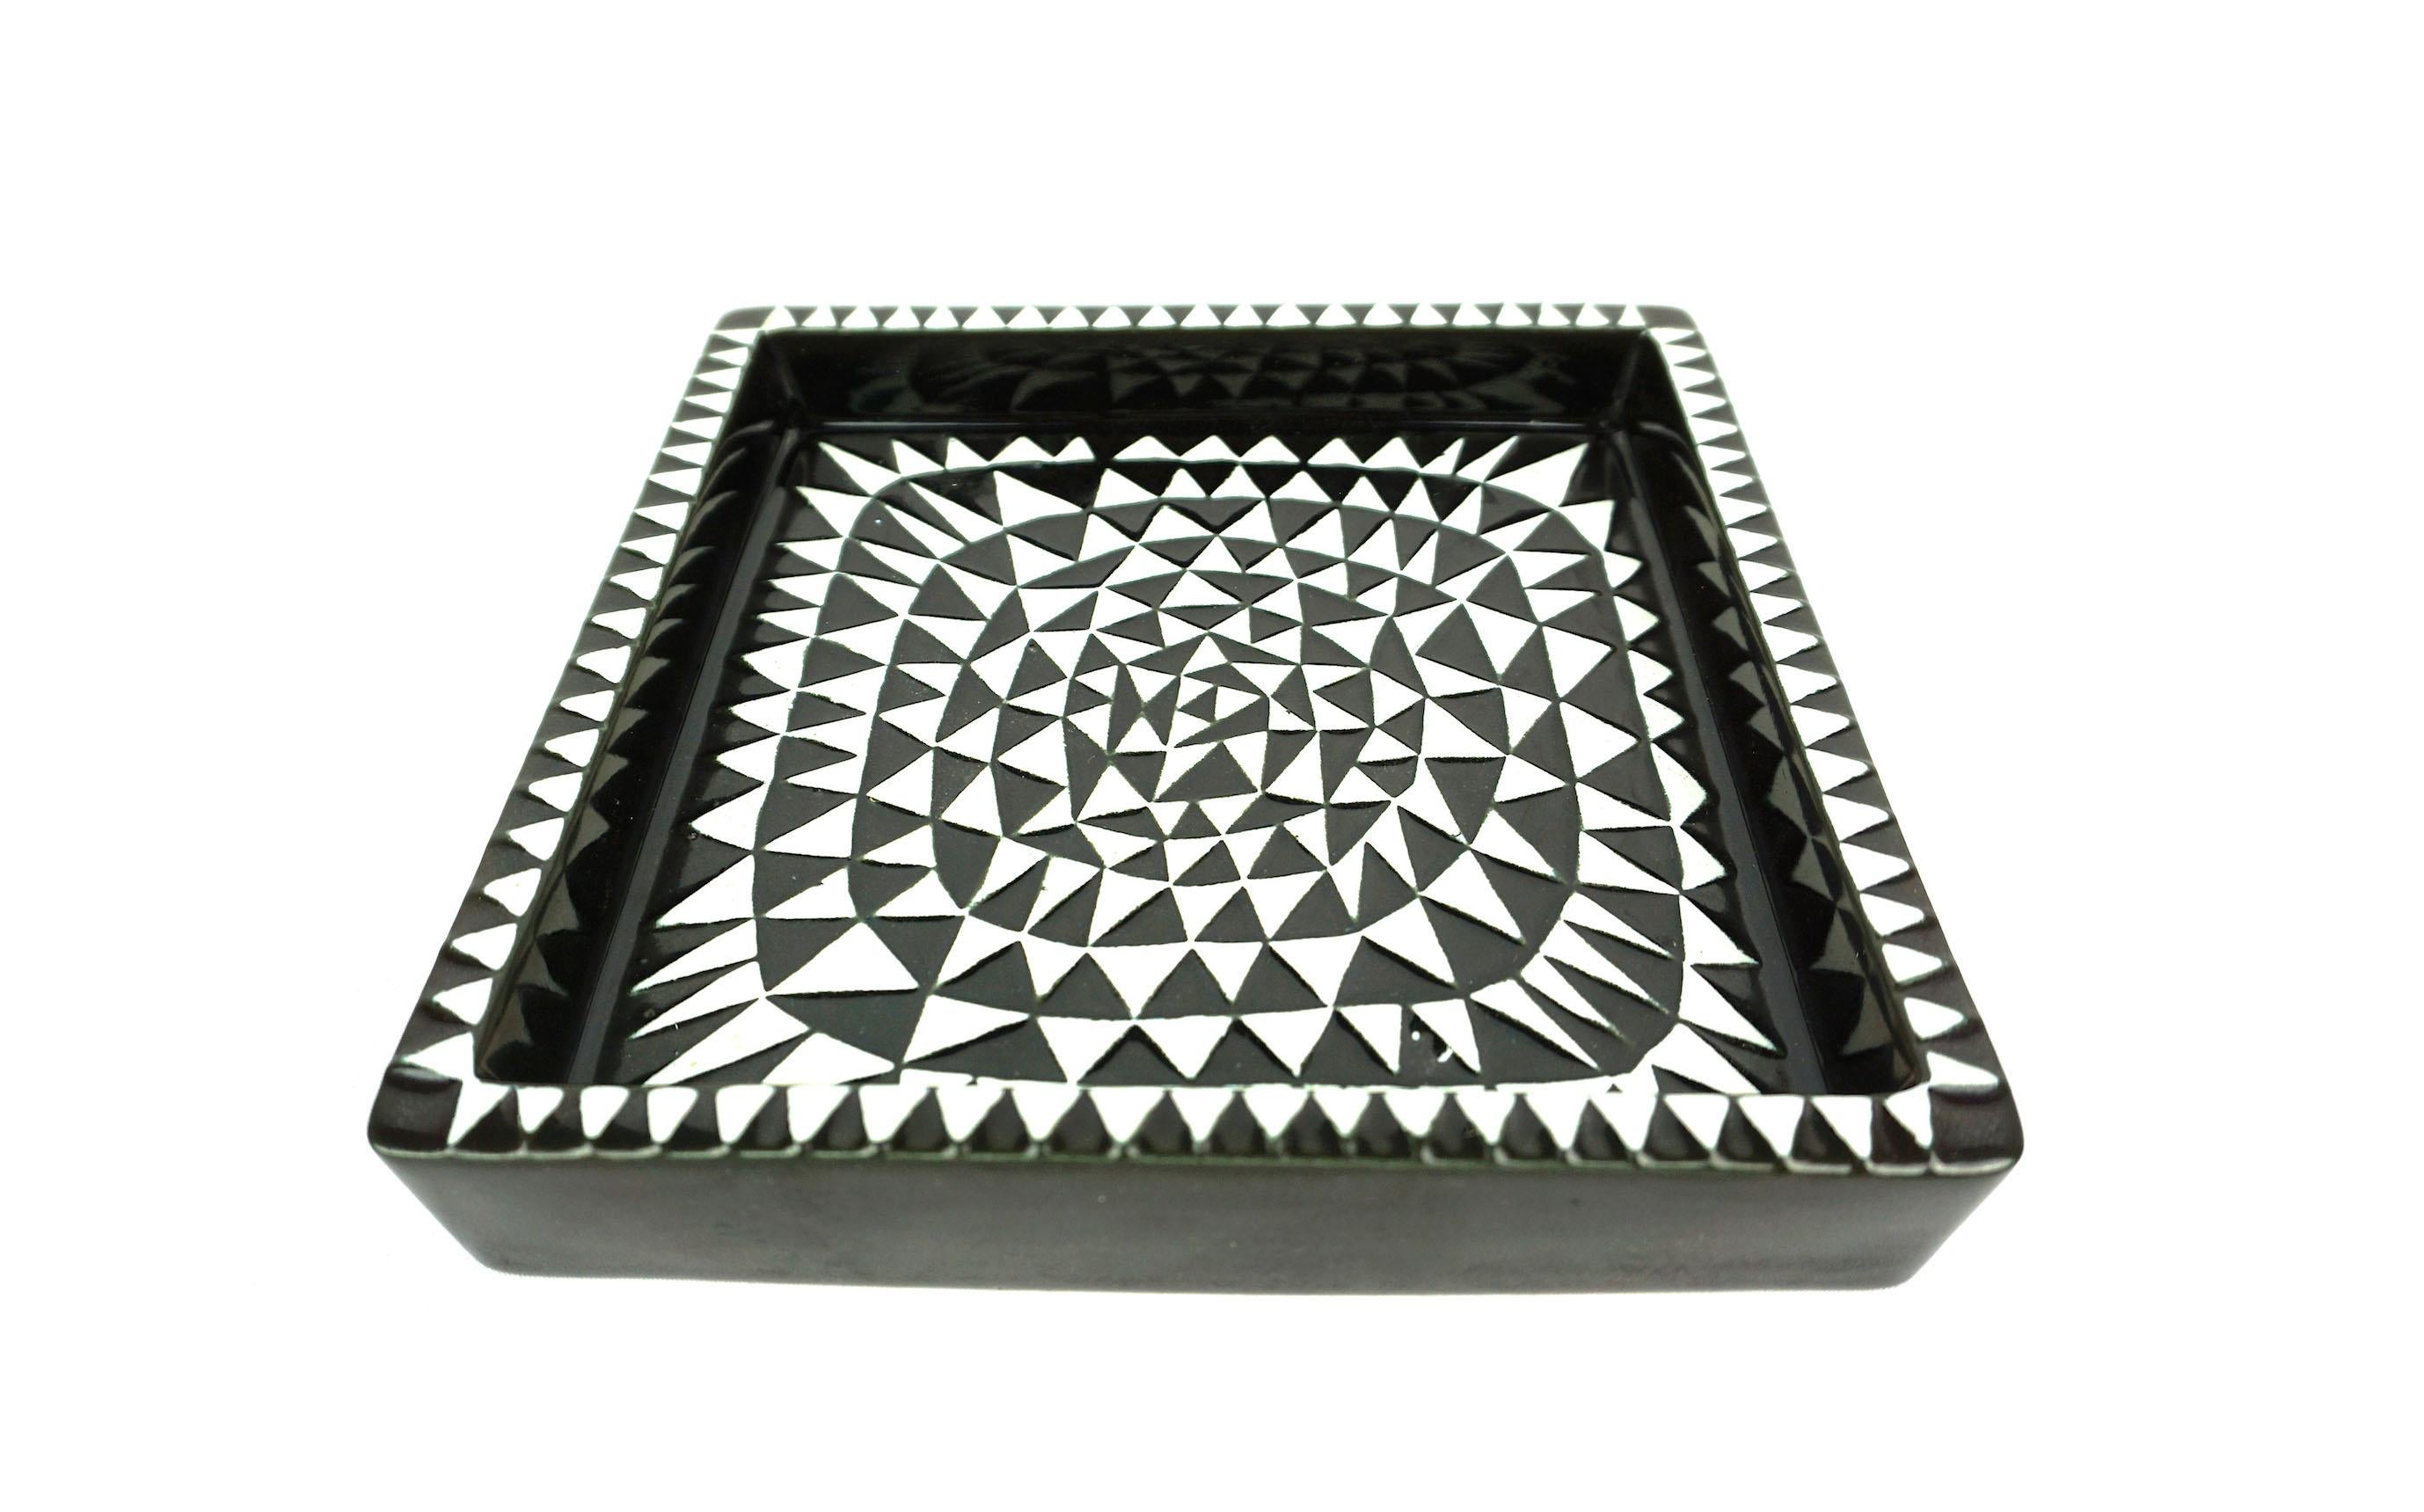 Ceramic tray model Domino designed by Stig Lindberg, produced by Gustavsberg in Sweden.
-Midcentury, Scandinavian
-Dimensions: H 3.5 x W 20 x D 20 cm.
 